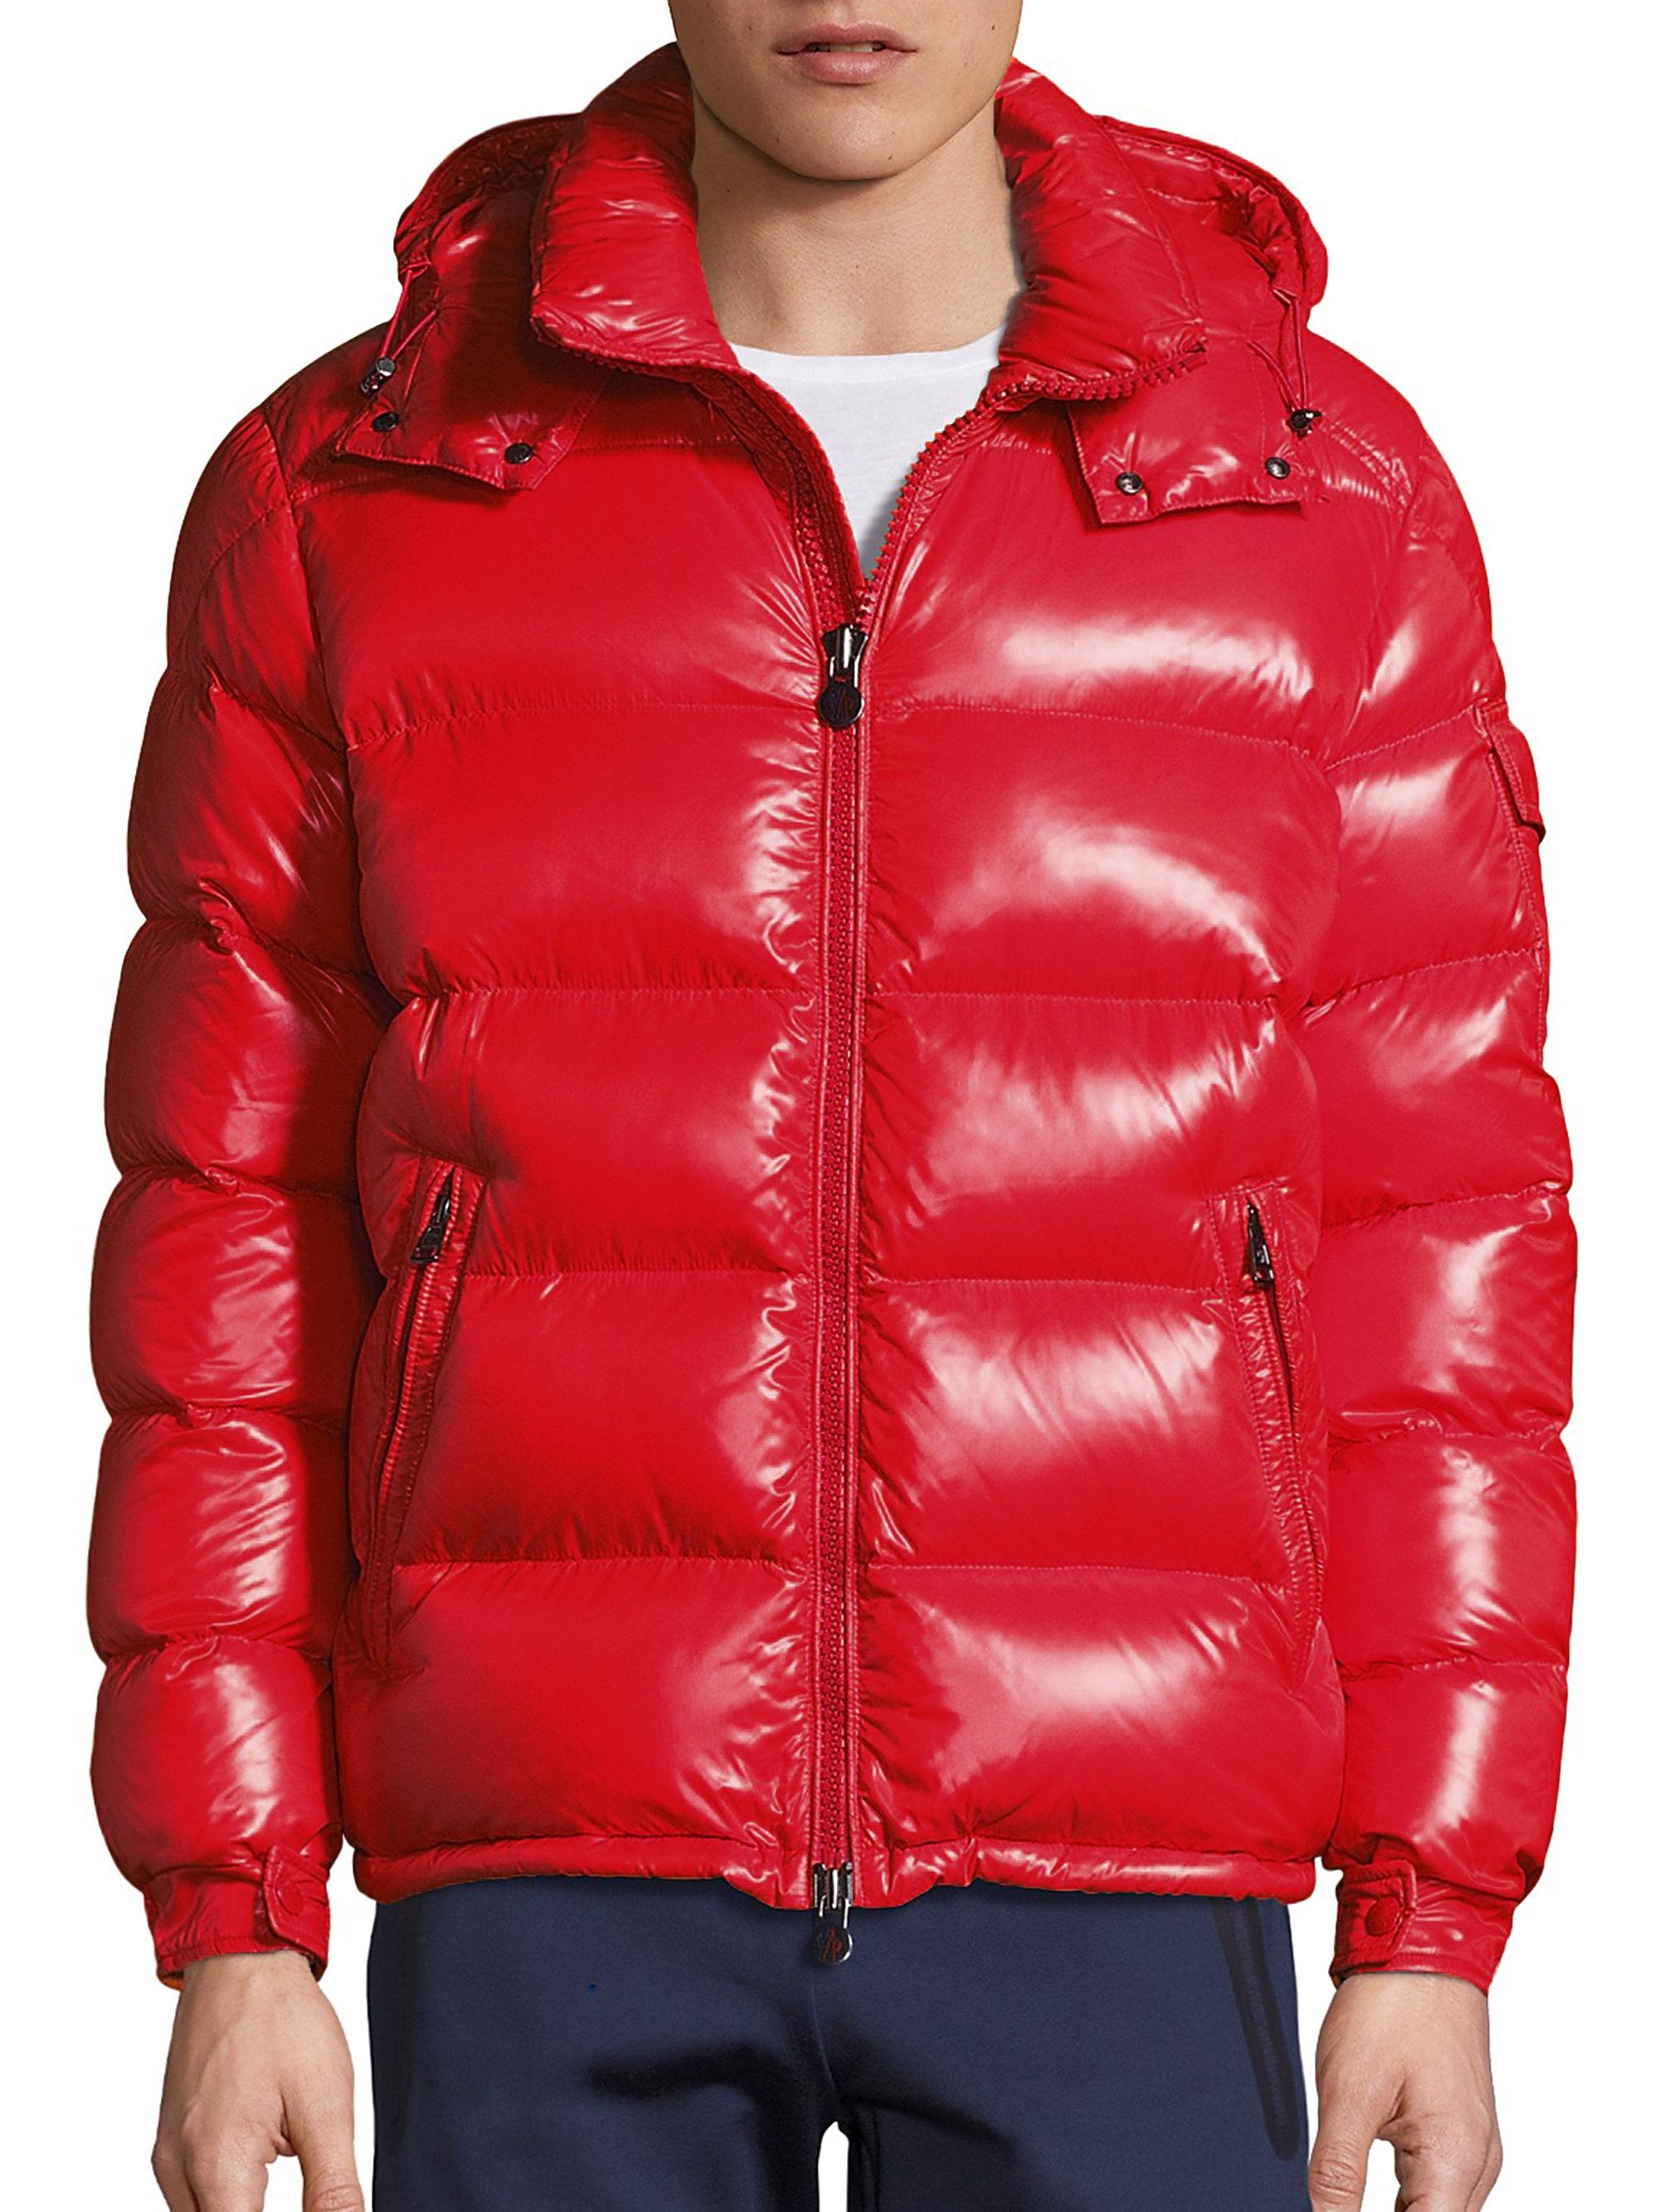 Lyst - Moncler Maya Shiny Puffer Jacket in Red for Men